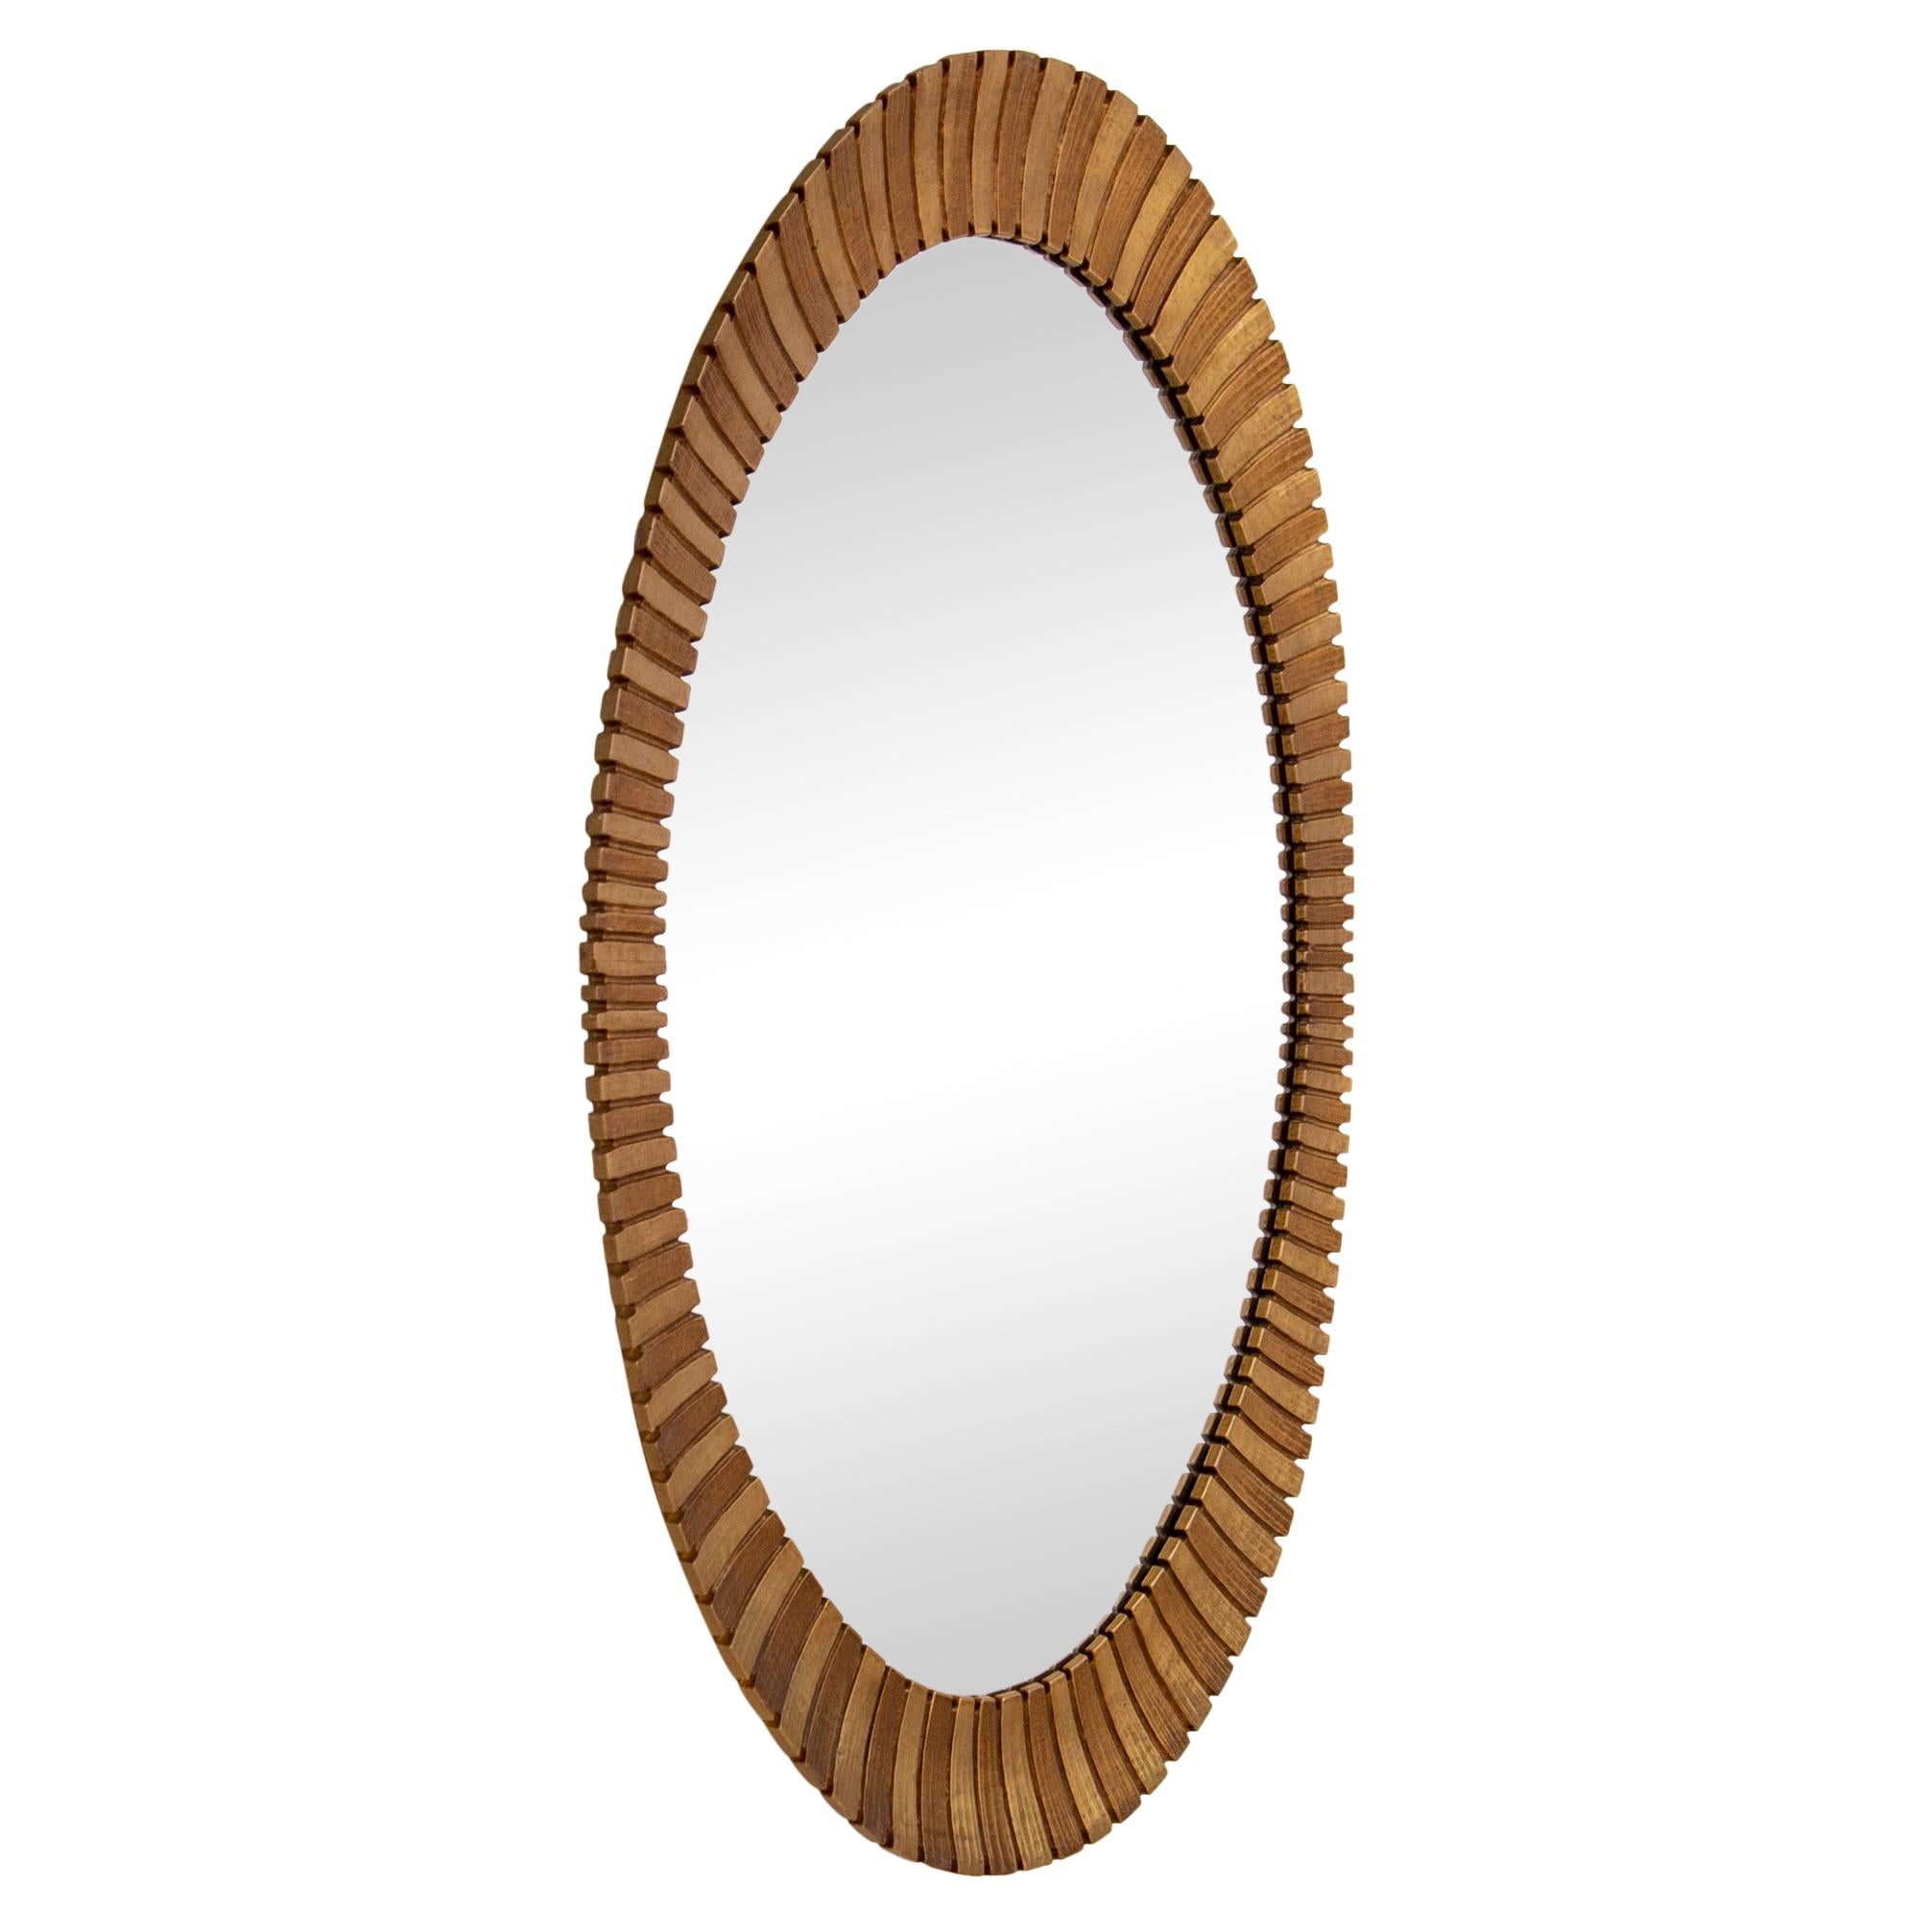 Mid-century large oval mirror in the style of Francisco Hurtado, circa 1970s. The durable cast resin frame features graduated concave scallops in alternating bronze and gold tones. It may be hung vertically or horizontally. Minimal age wear to the